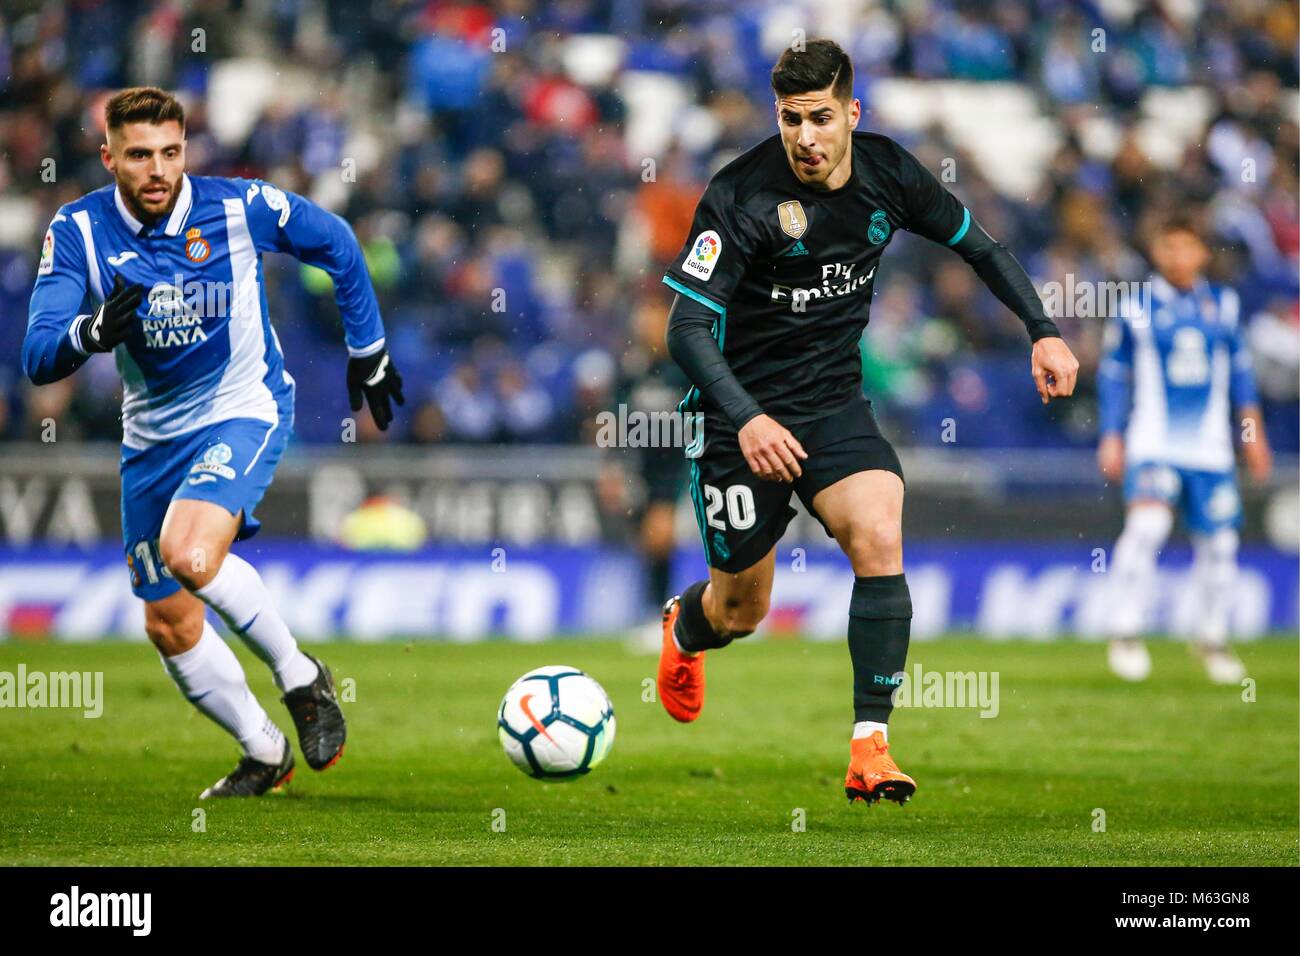 Increíble Eficacia Almeja SPAIN - February,27th: Real Madrid midfielder Marco Asensio (20) during the  match between RCD Espanyol vs Real Madrid, for the round 26 of the Liga  Santander, played at RCD Espanyol Stadium on